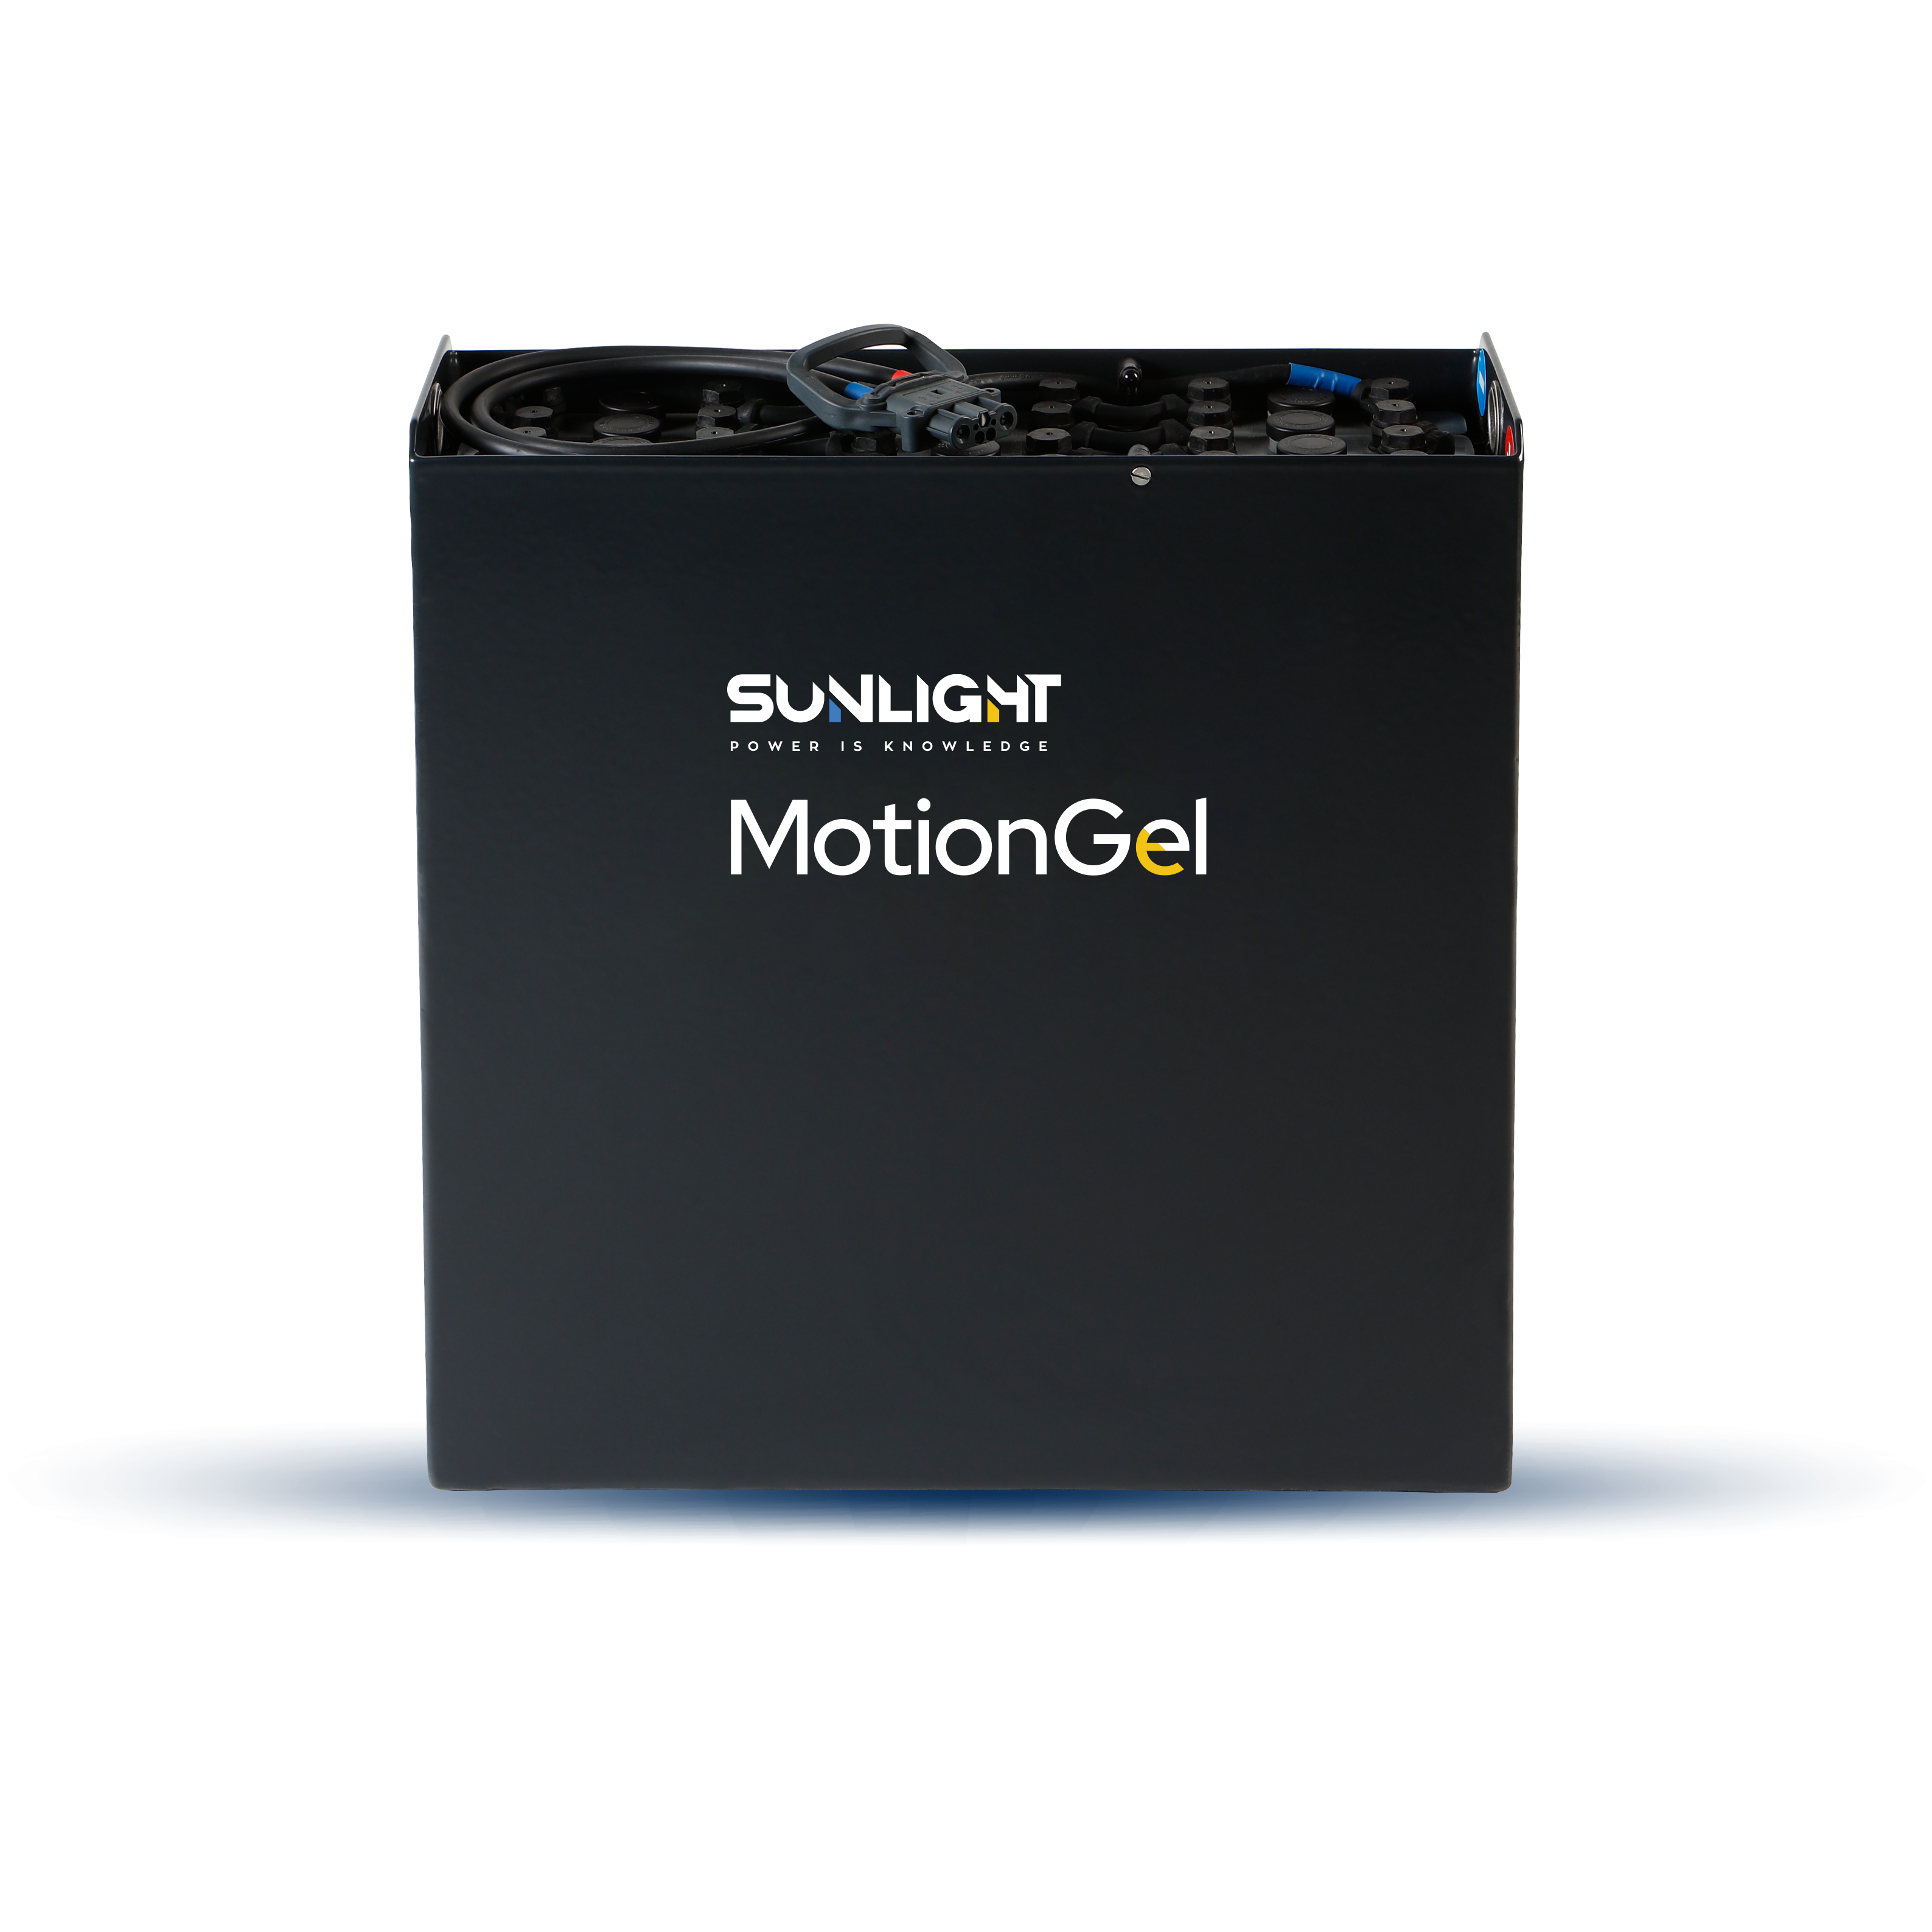 Sunlight MotionGel - Maintenance-free sealed-type GEL battery ideal for food, pharmaceutical, and chemical industries where hygiene standards are essential.